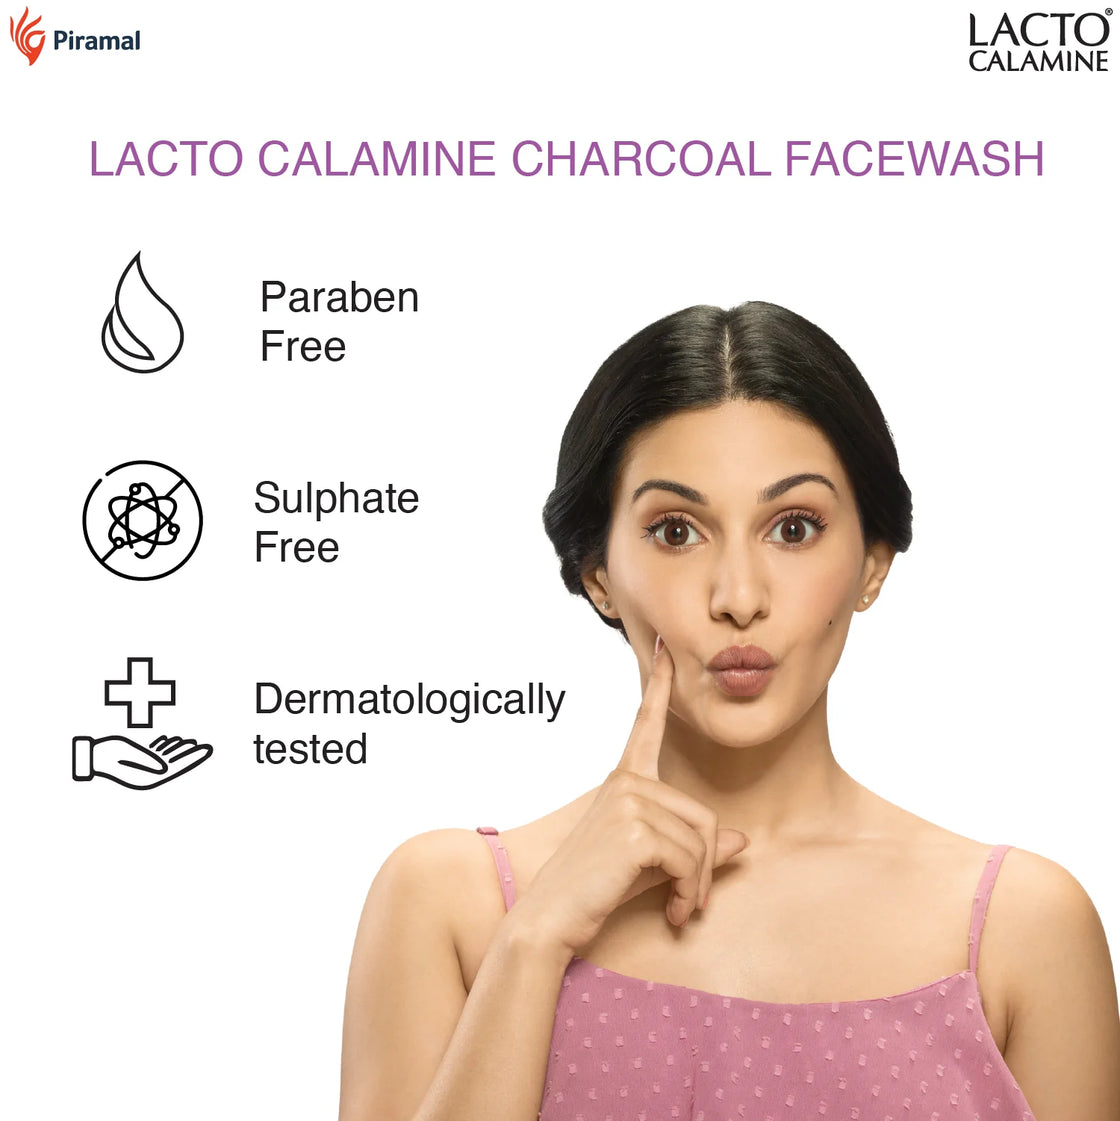 Lacto Calamine Activated Charcoal Face Wash Contains Aloe Vera & Tea Tree Extract-100ml